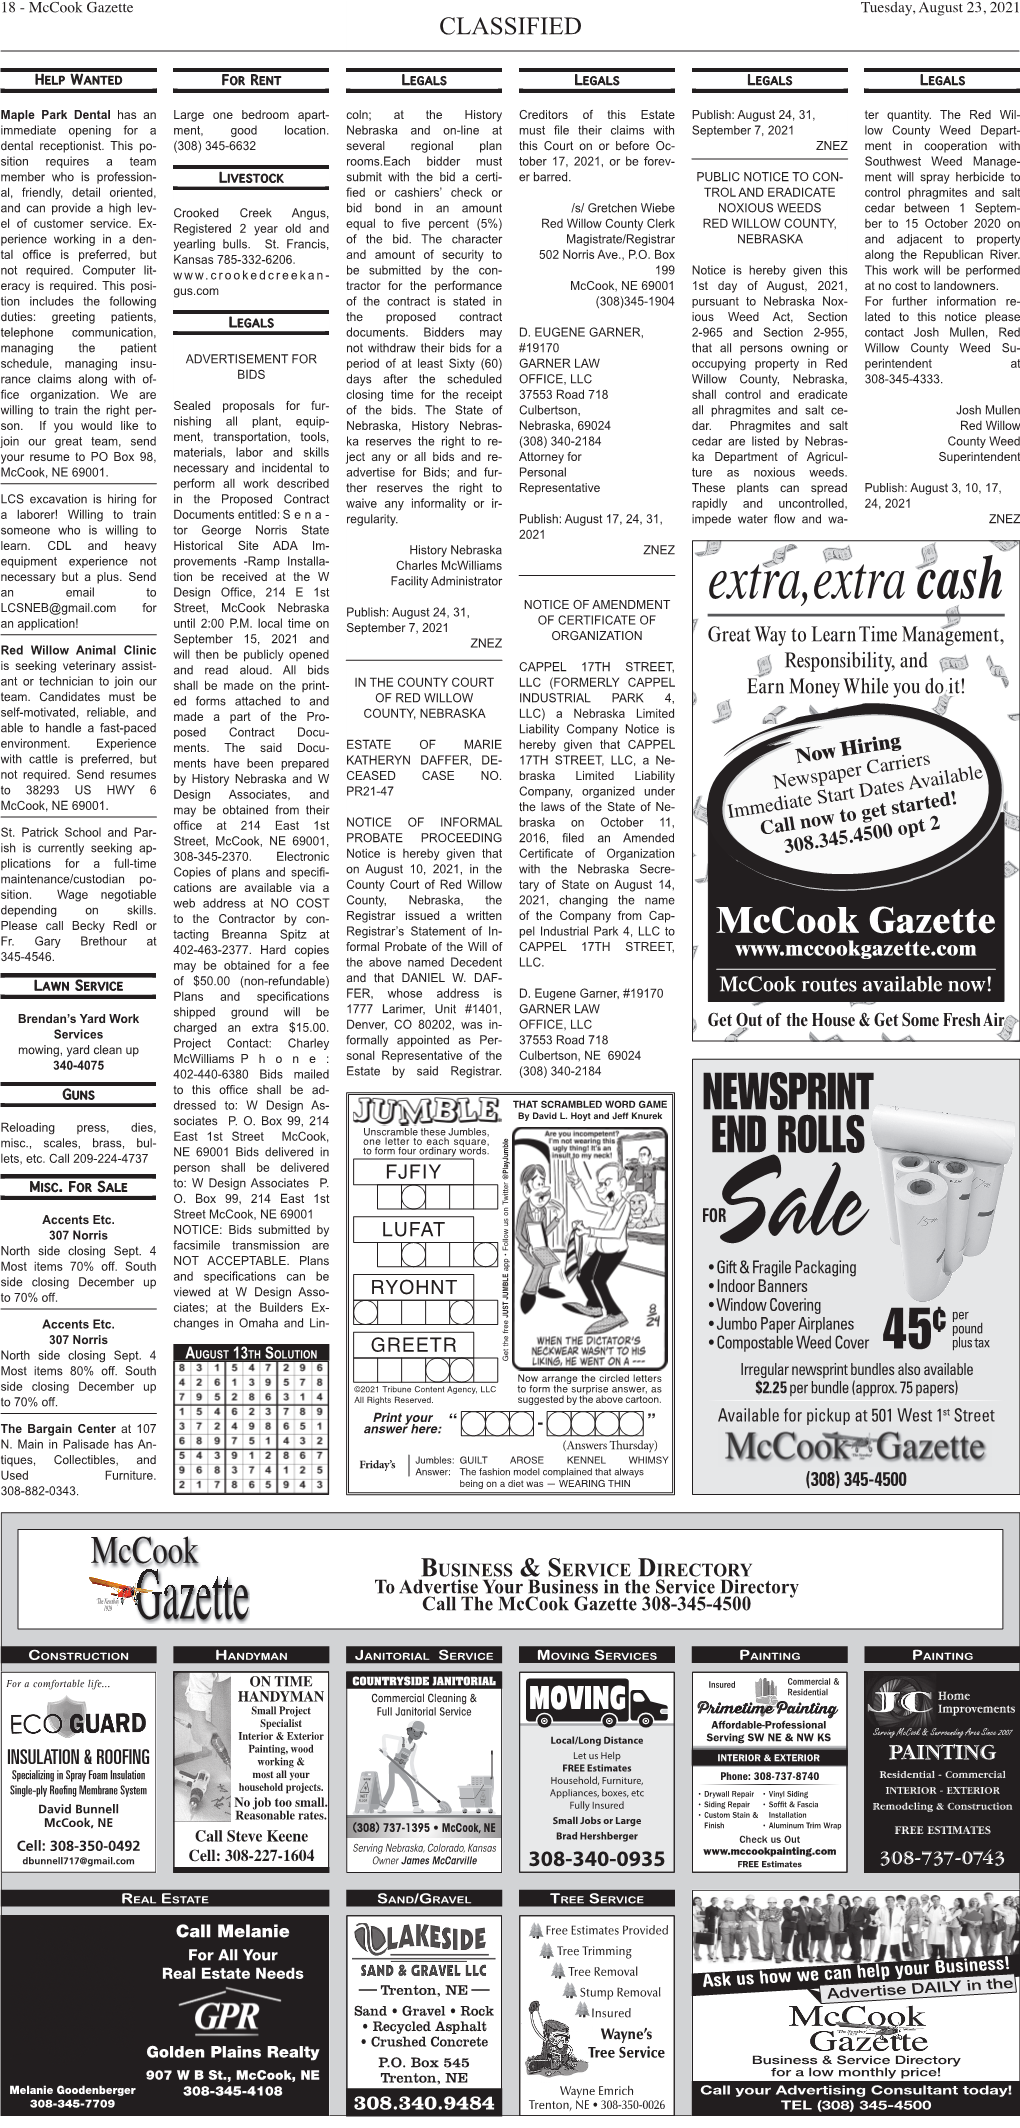 (/) Tuesday Classified Page 16-18.Indd